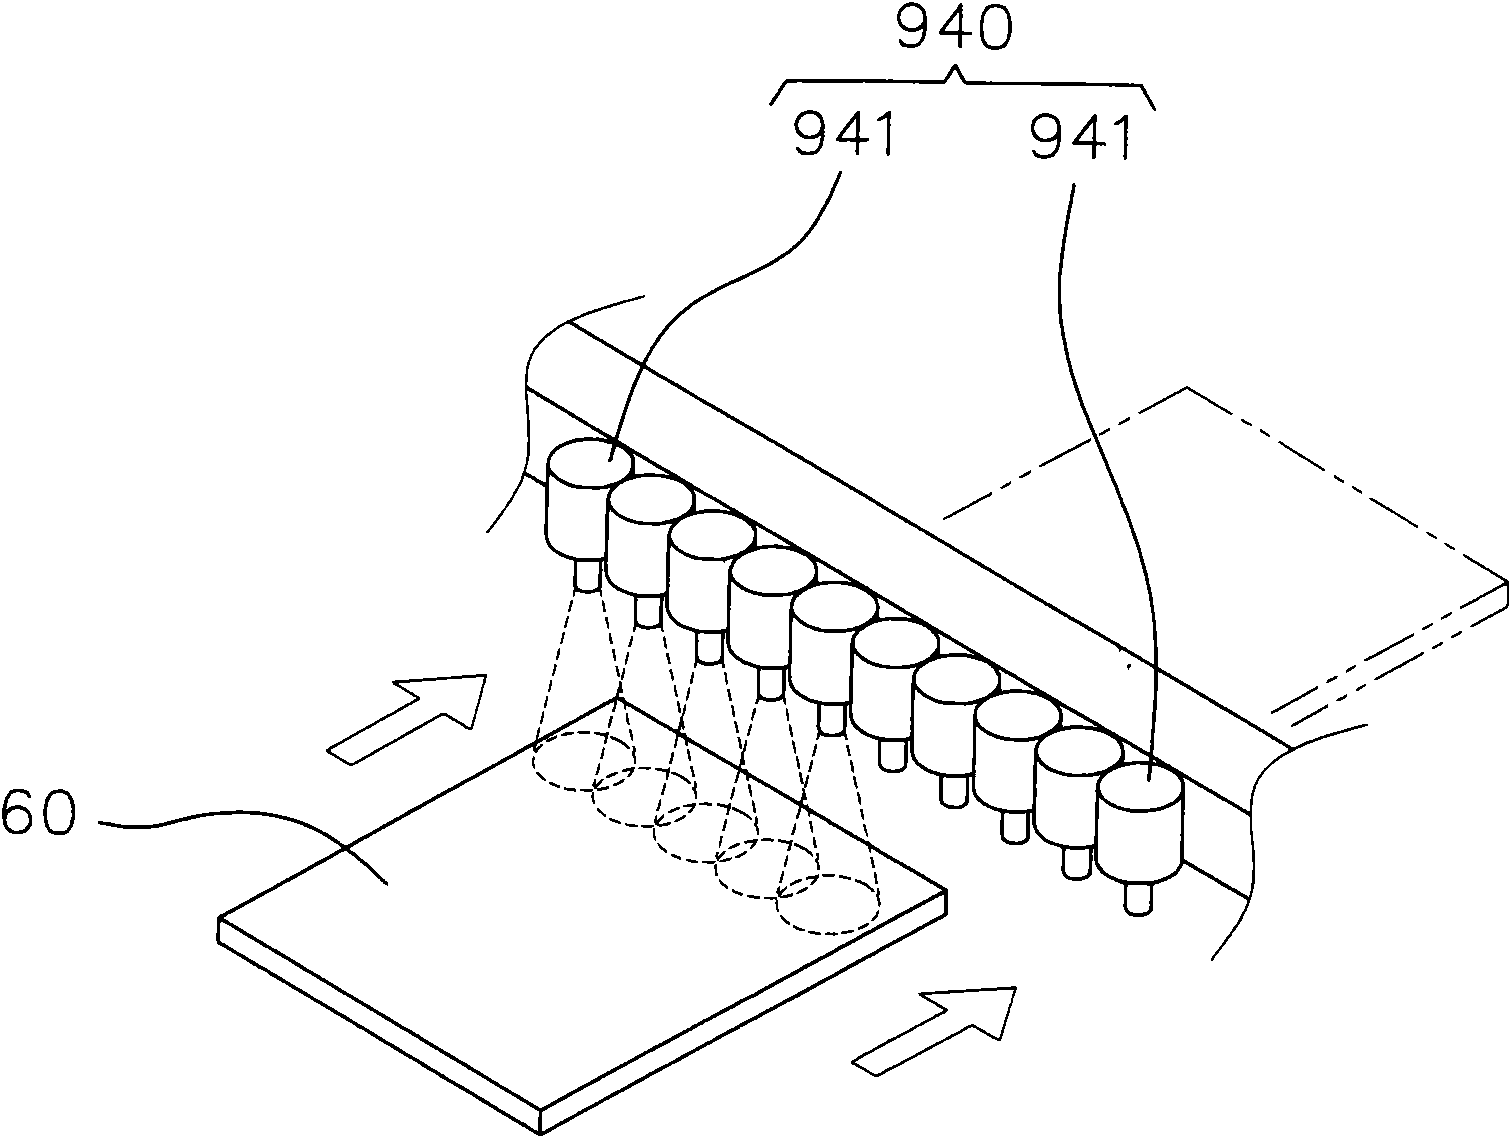 Laser repair device with automatic detection function